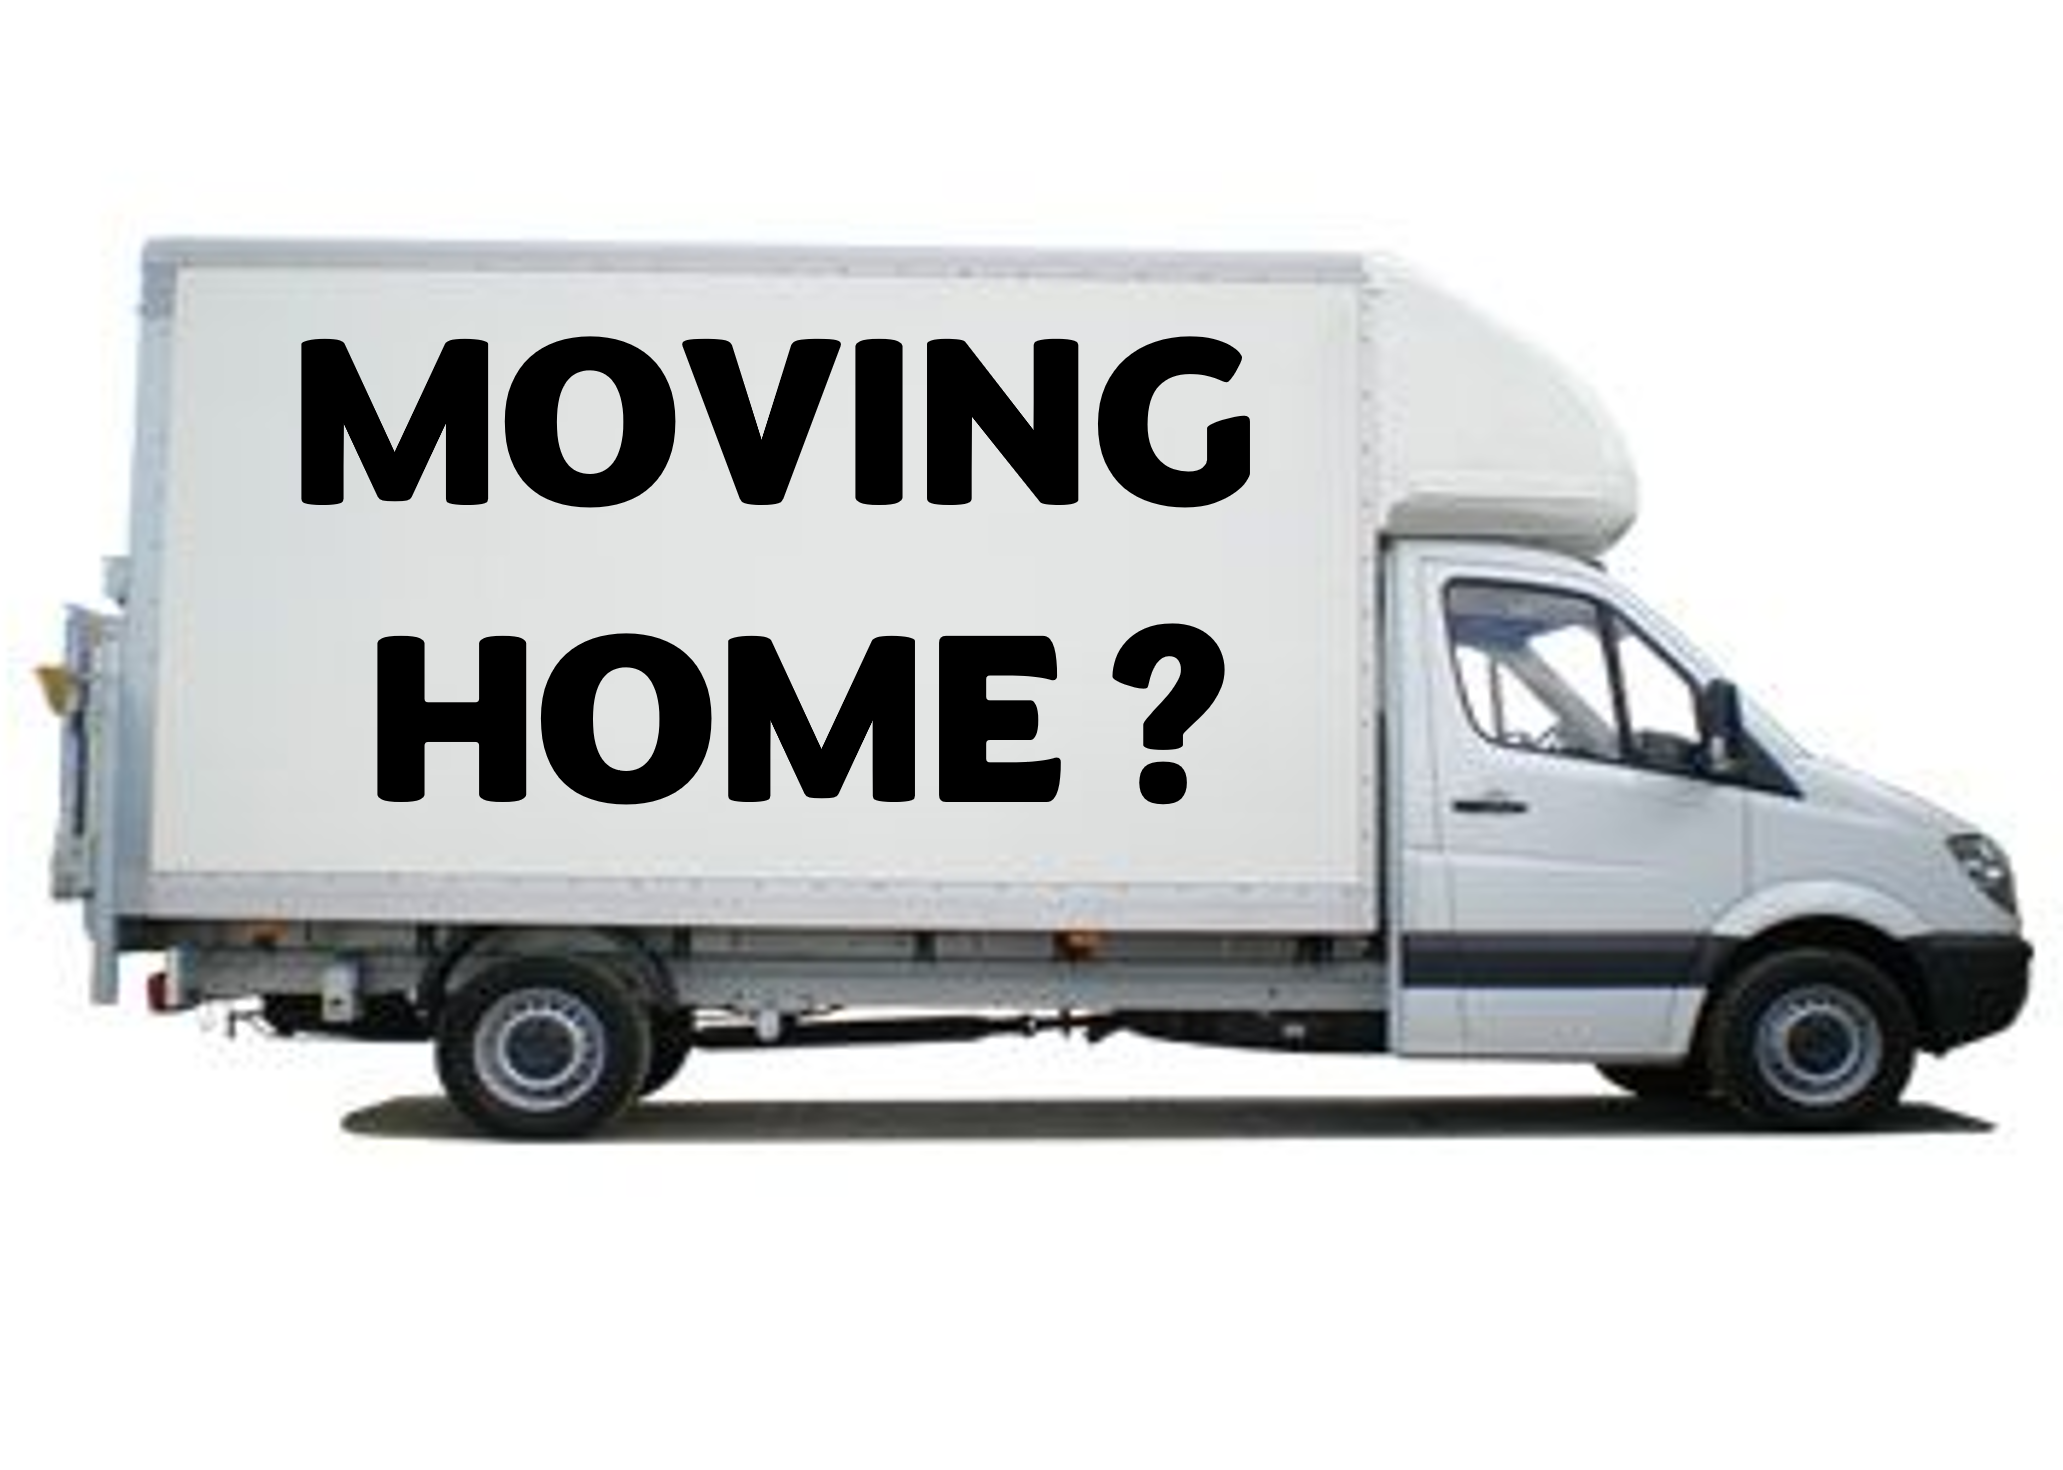 Moving Home